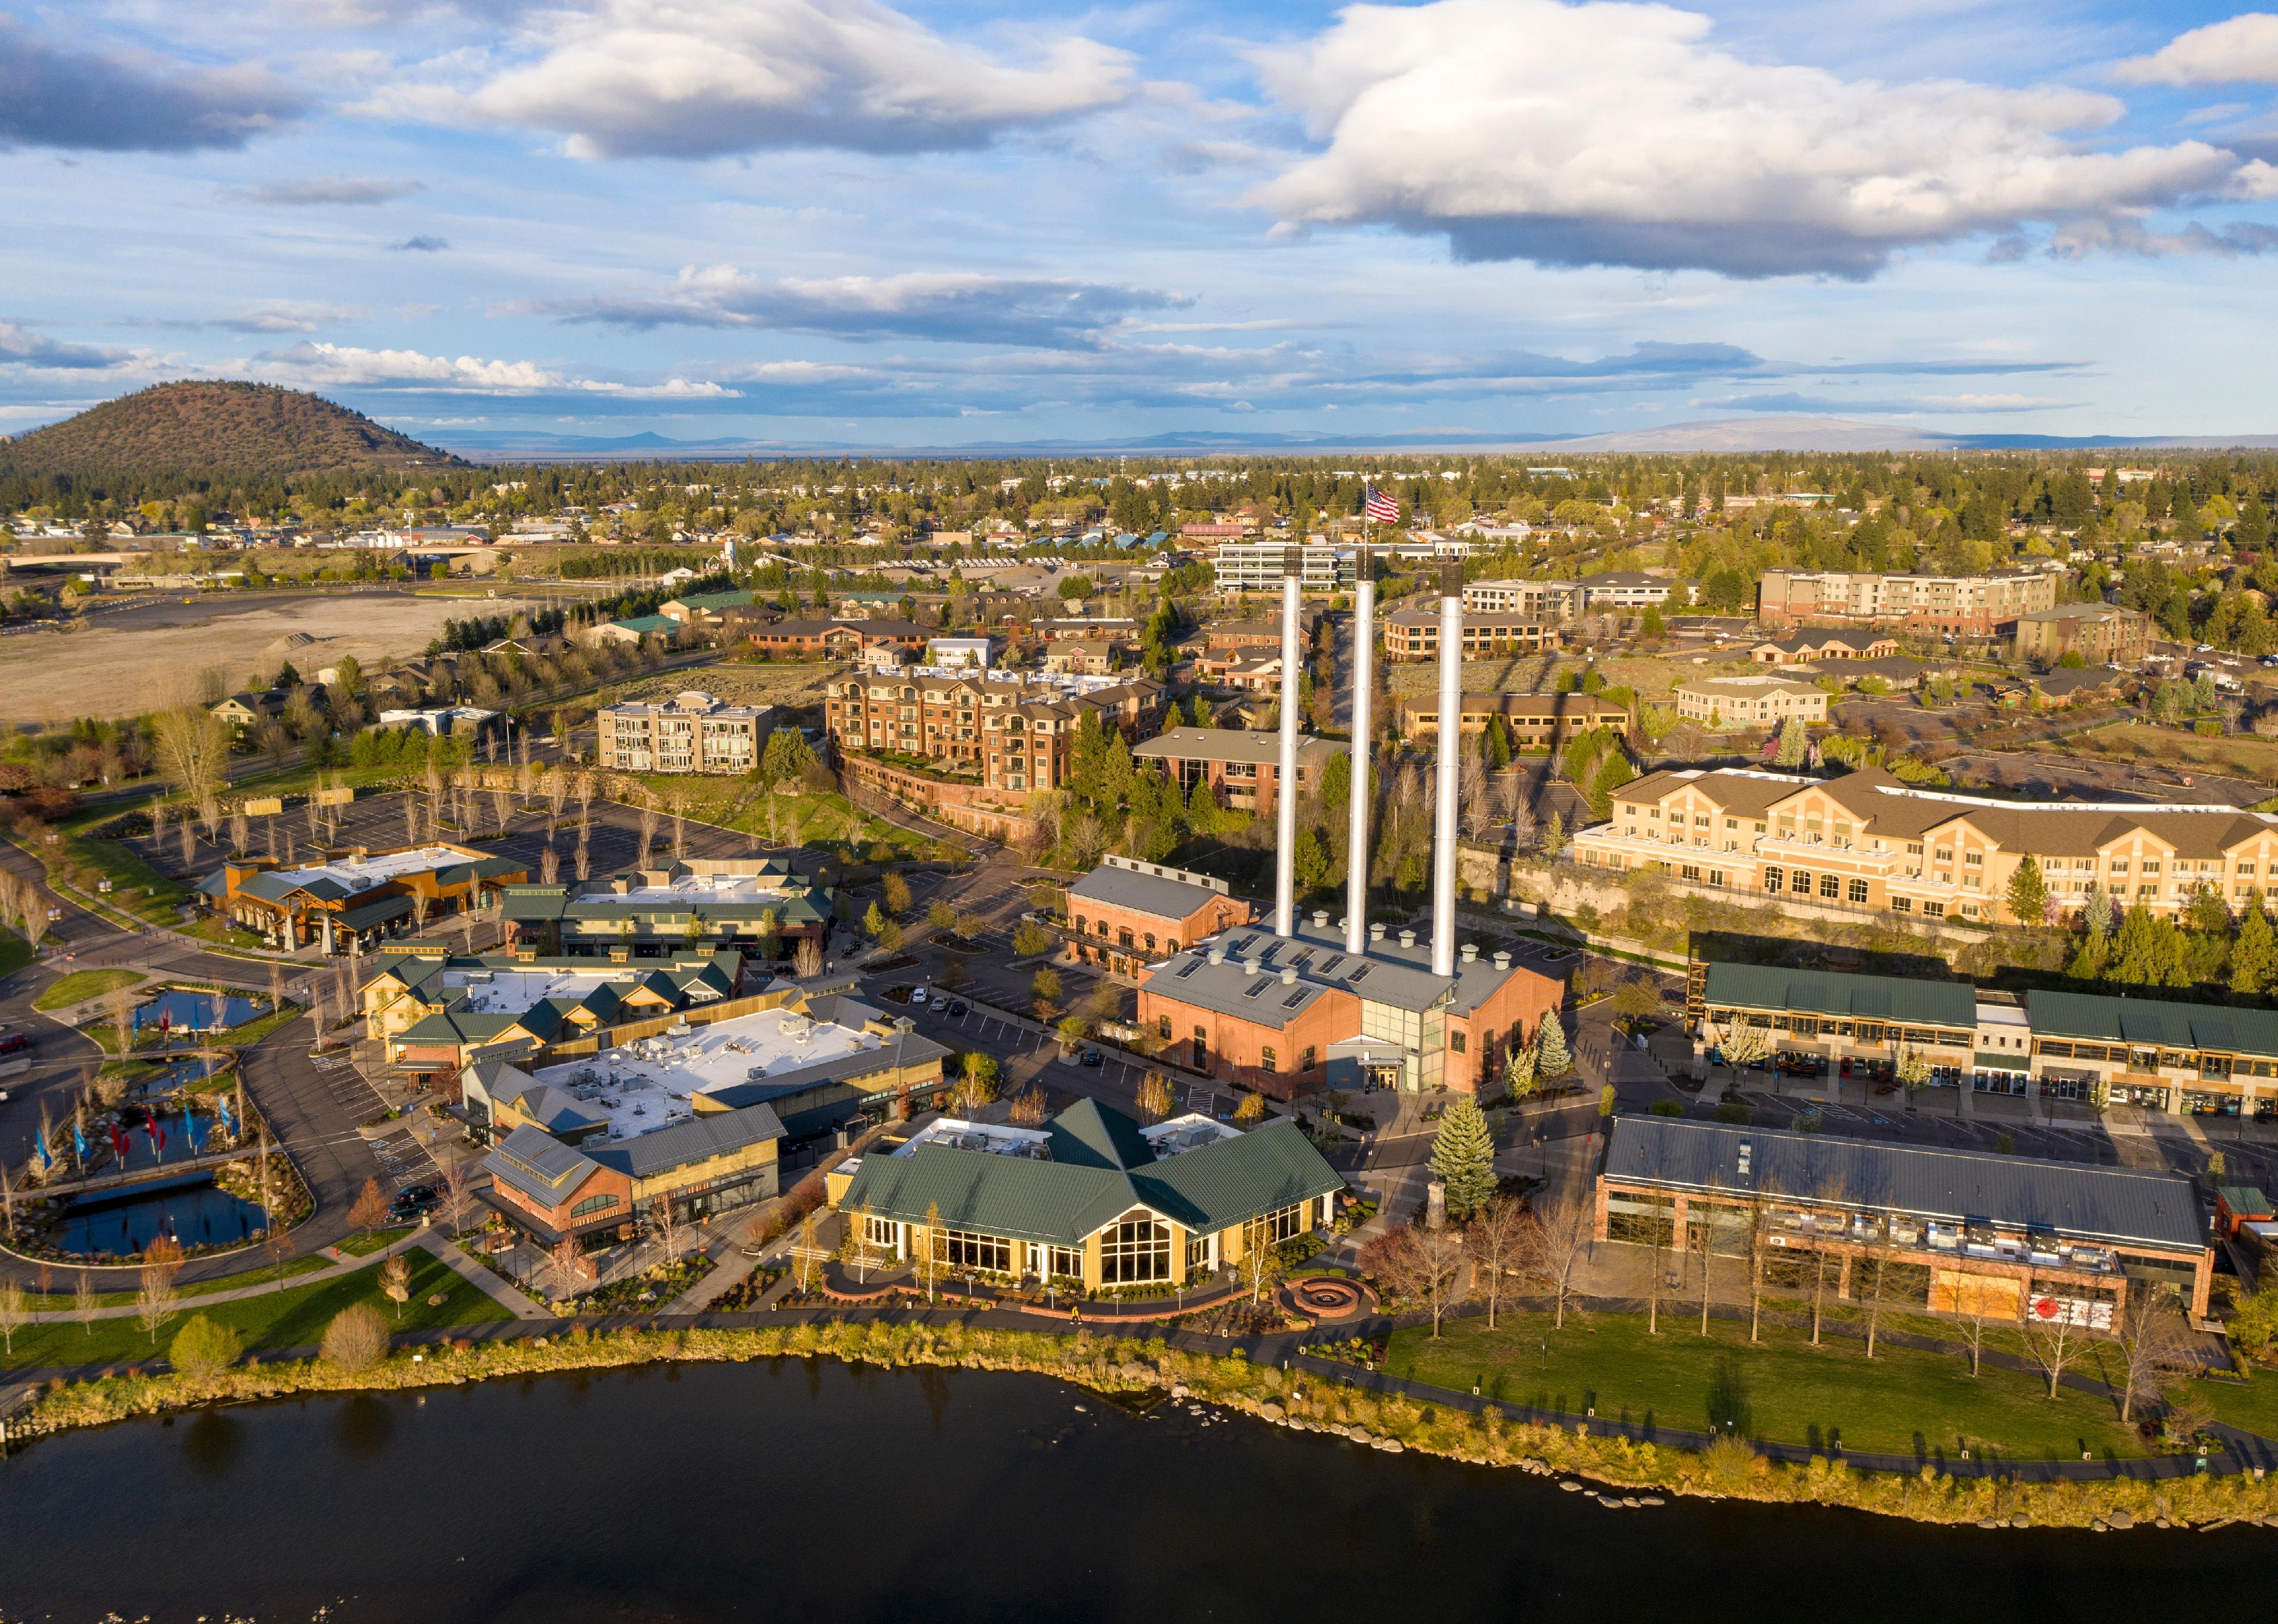 Aerial view of the Old Mill District in Bend.